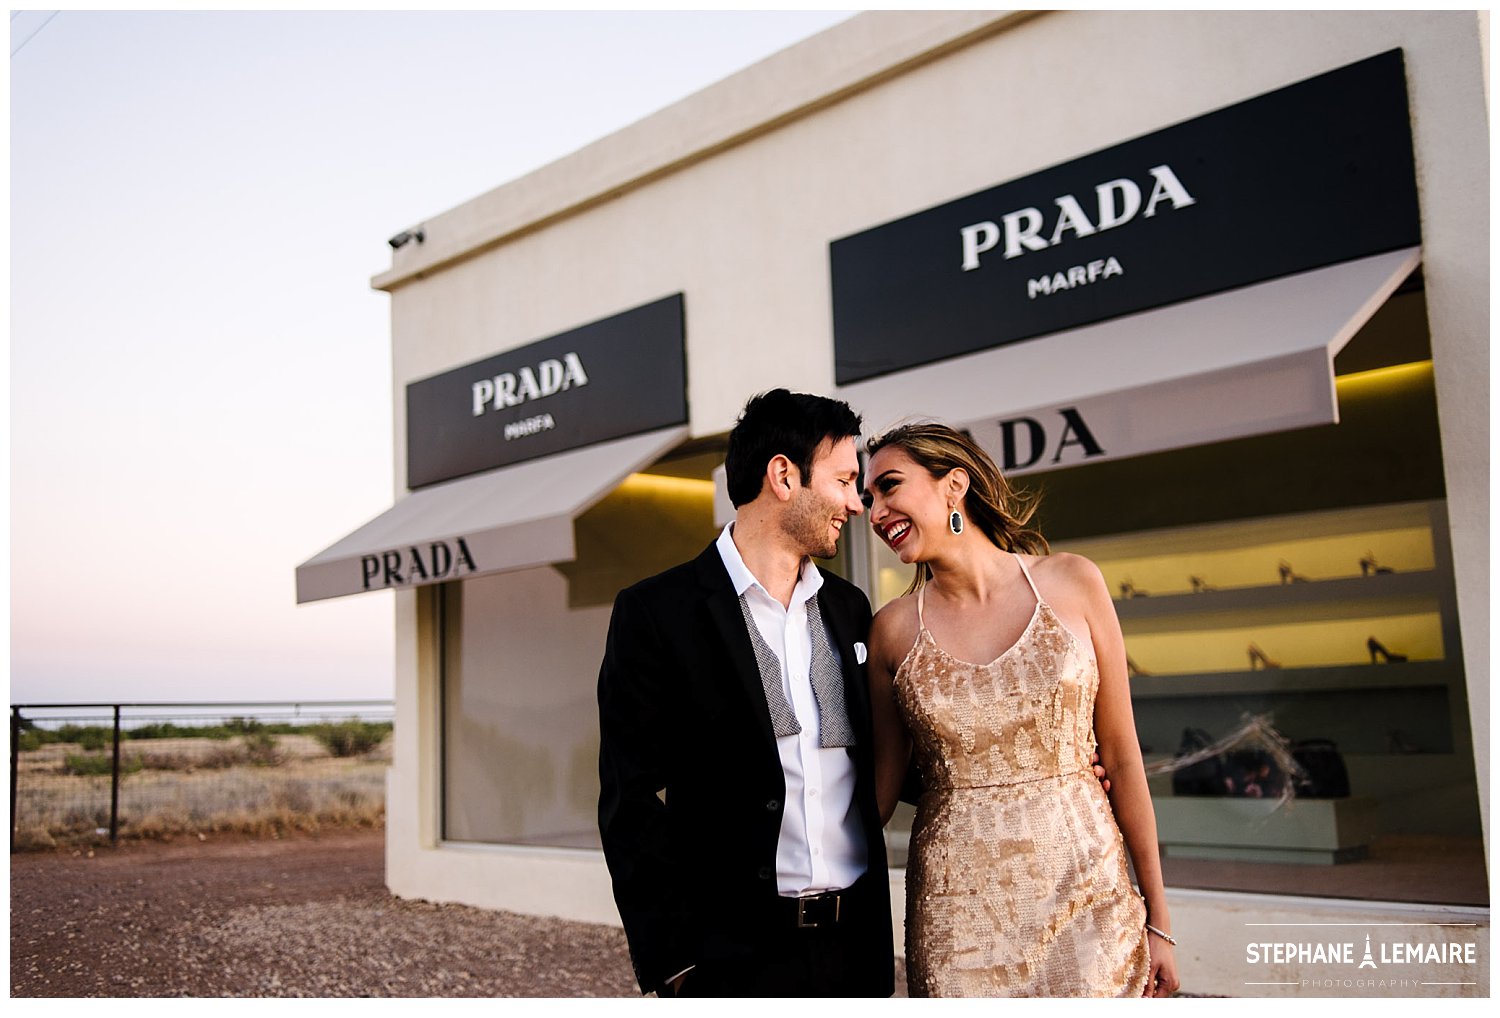 Couple in front of Marfa Prada storefront in editorial style engagement shoot by stephane lemaire photography 